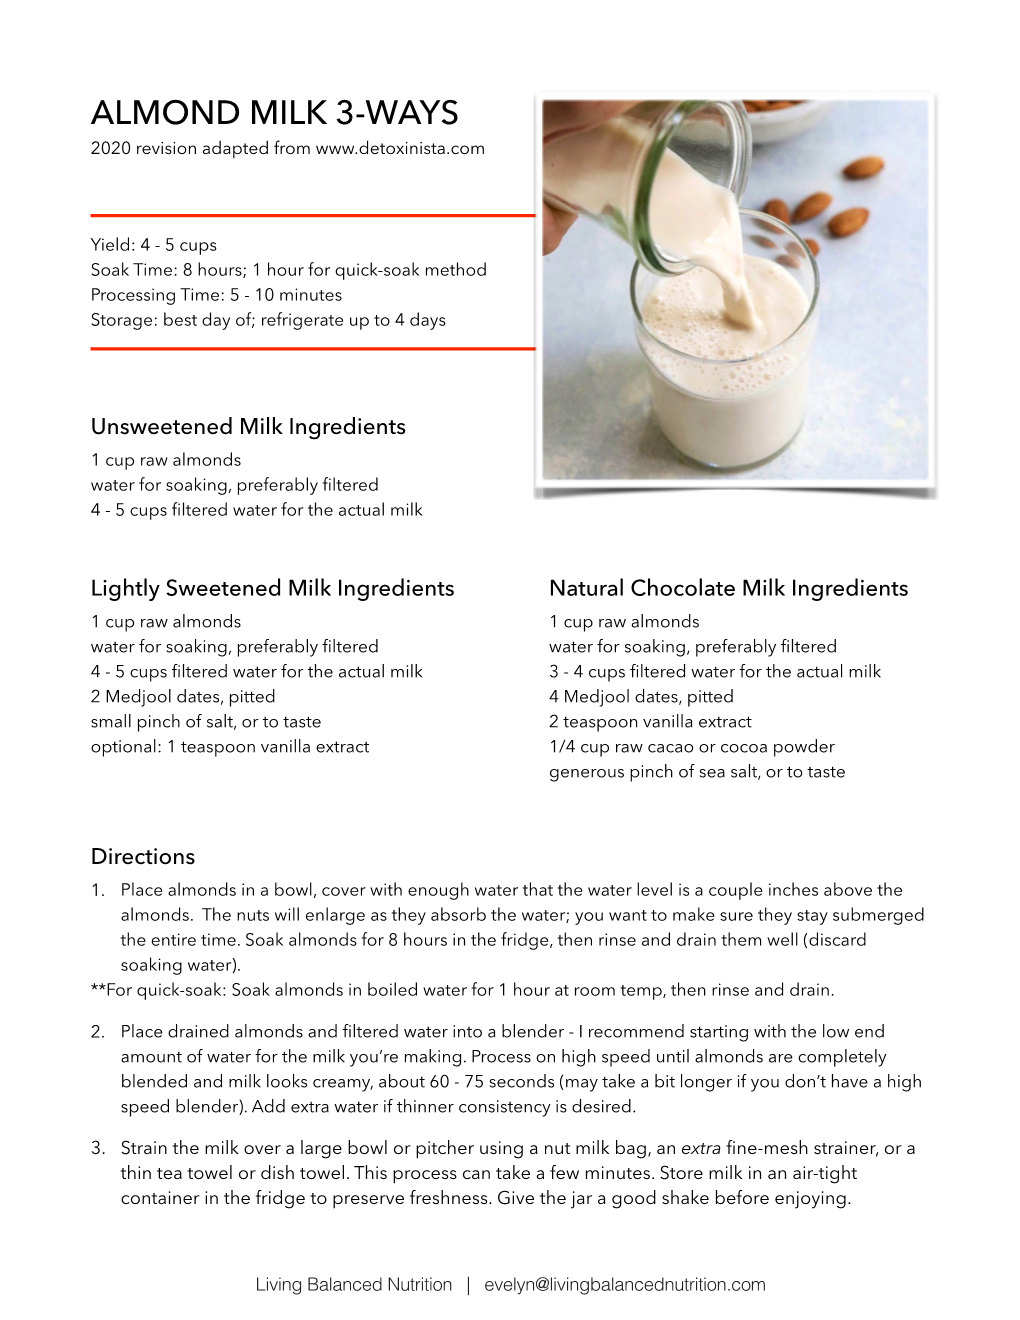 ALMOND MILK 3-WAYS 2020 Revision Adapted From